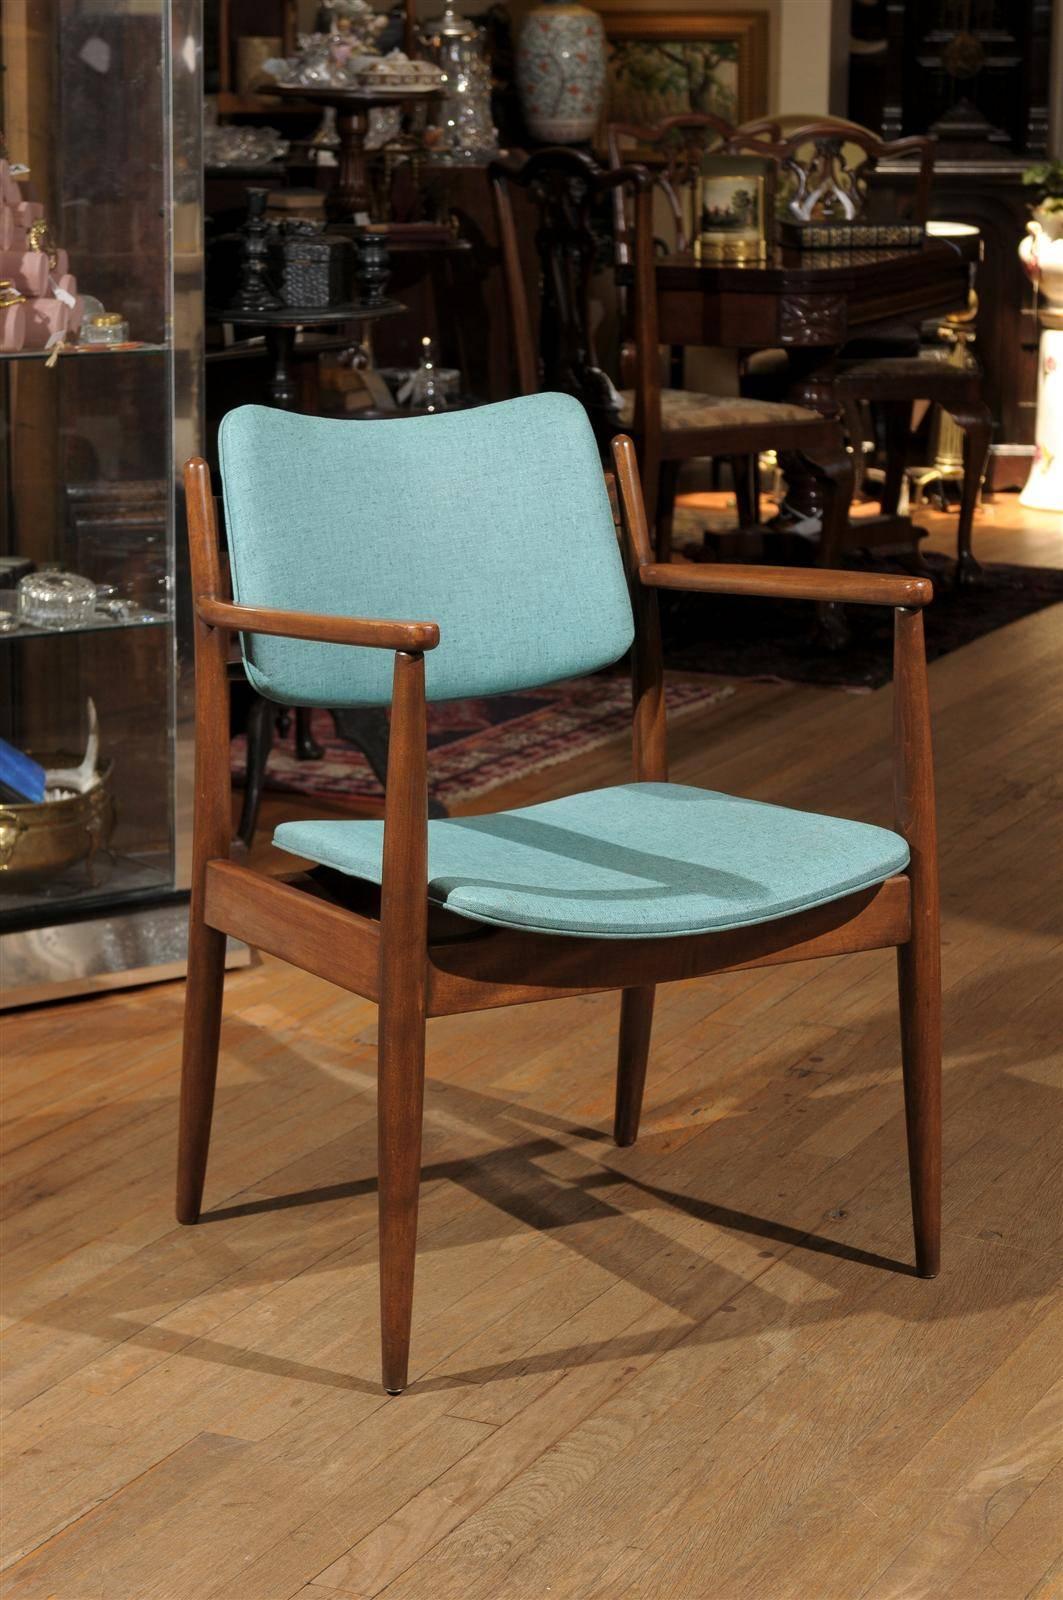 Sculptural solid walnut and upholstered occasional chair after Finn Juhl. The chair has tapered legs, a subtly curved chair back and retains its original turquoise vinyl upholstery.